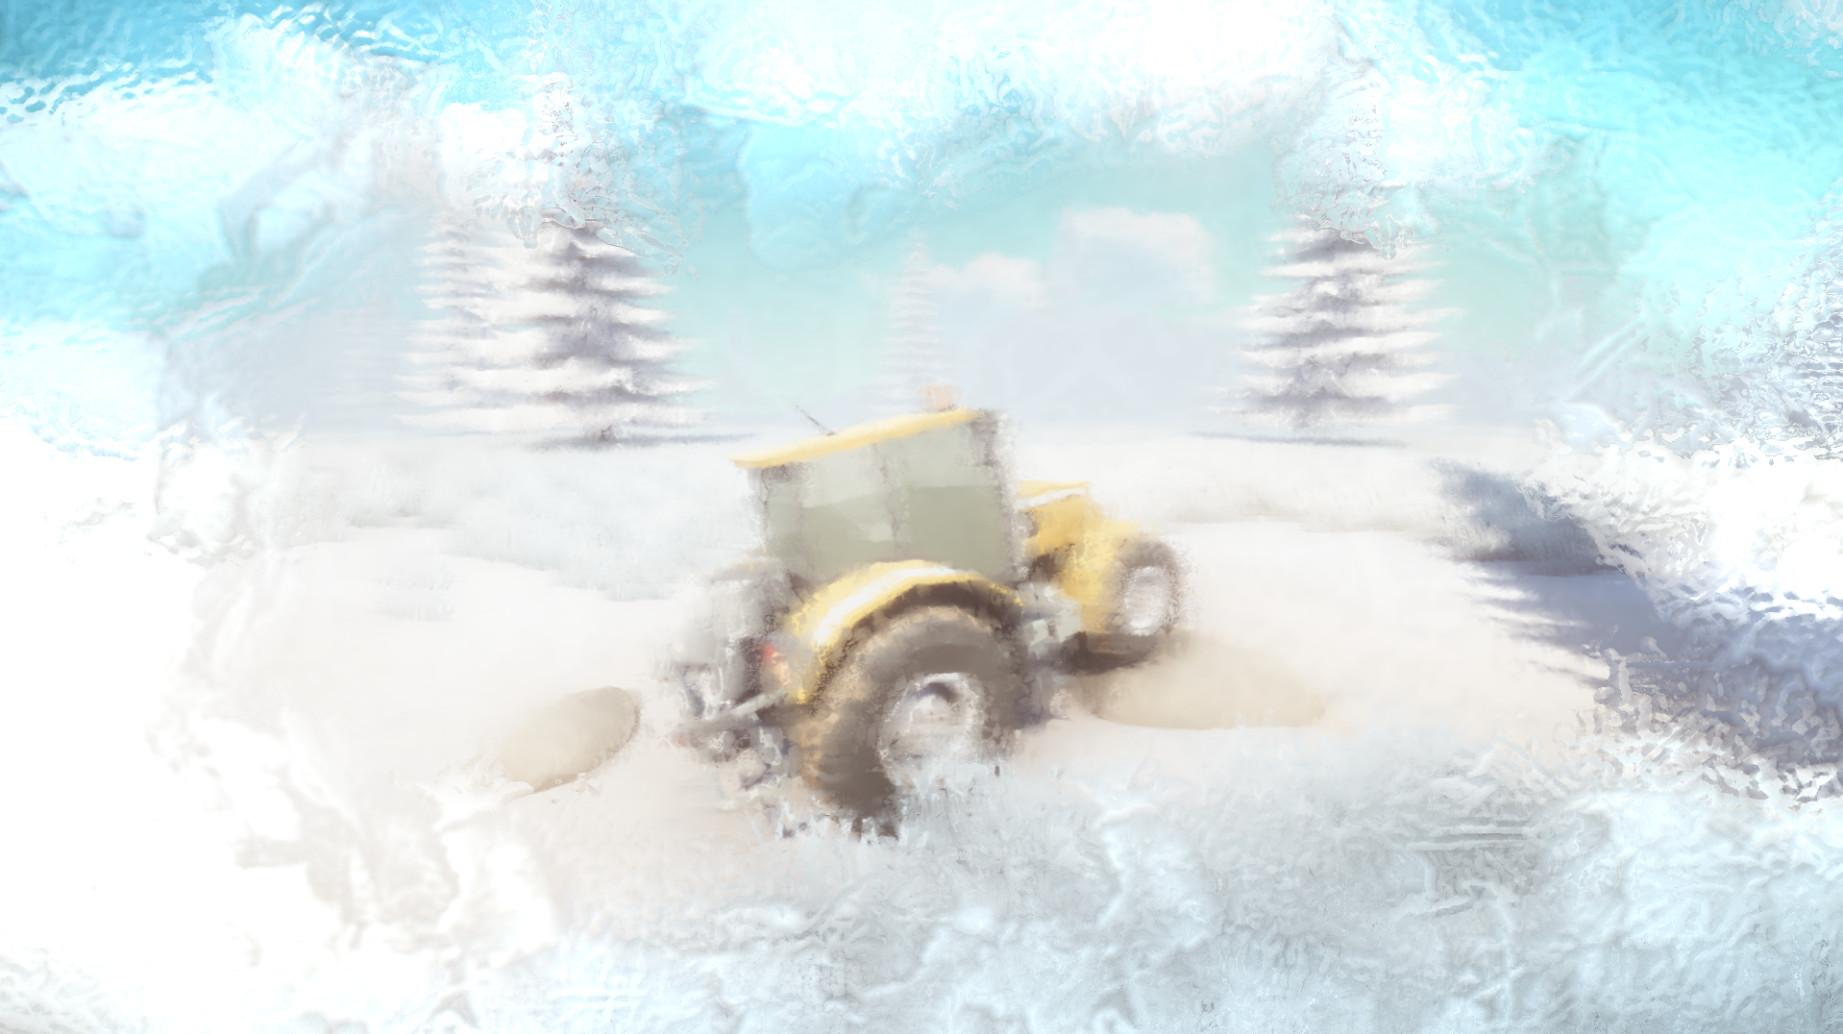 Off-Road Farming Free Download